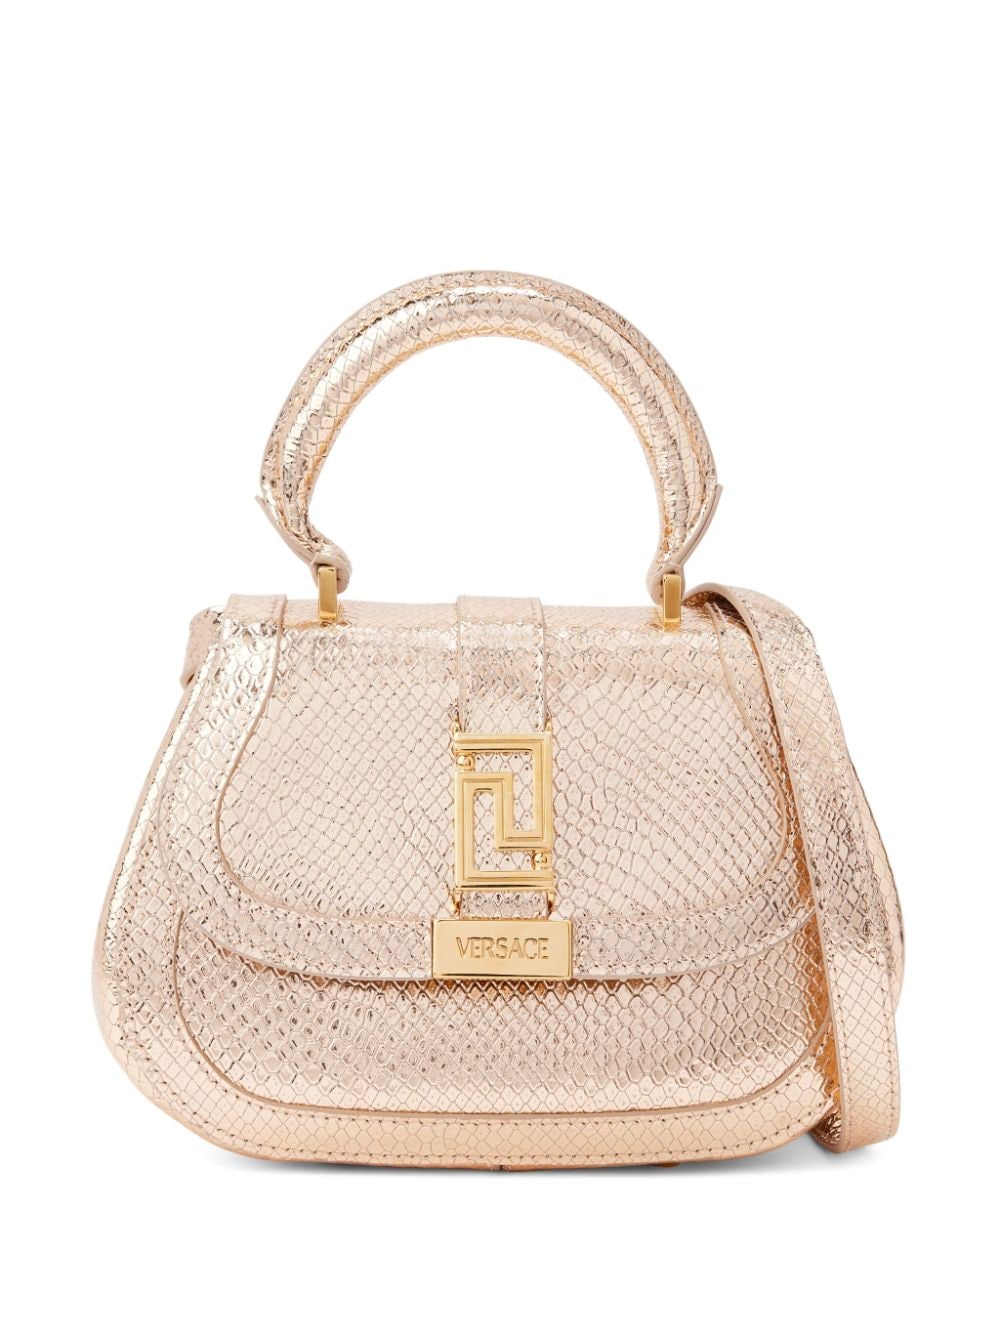 Versace Greca Goddess Leather Tote Bag In Pink